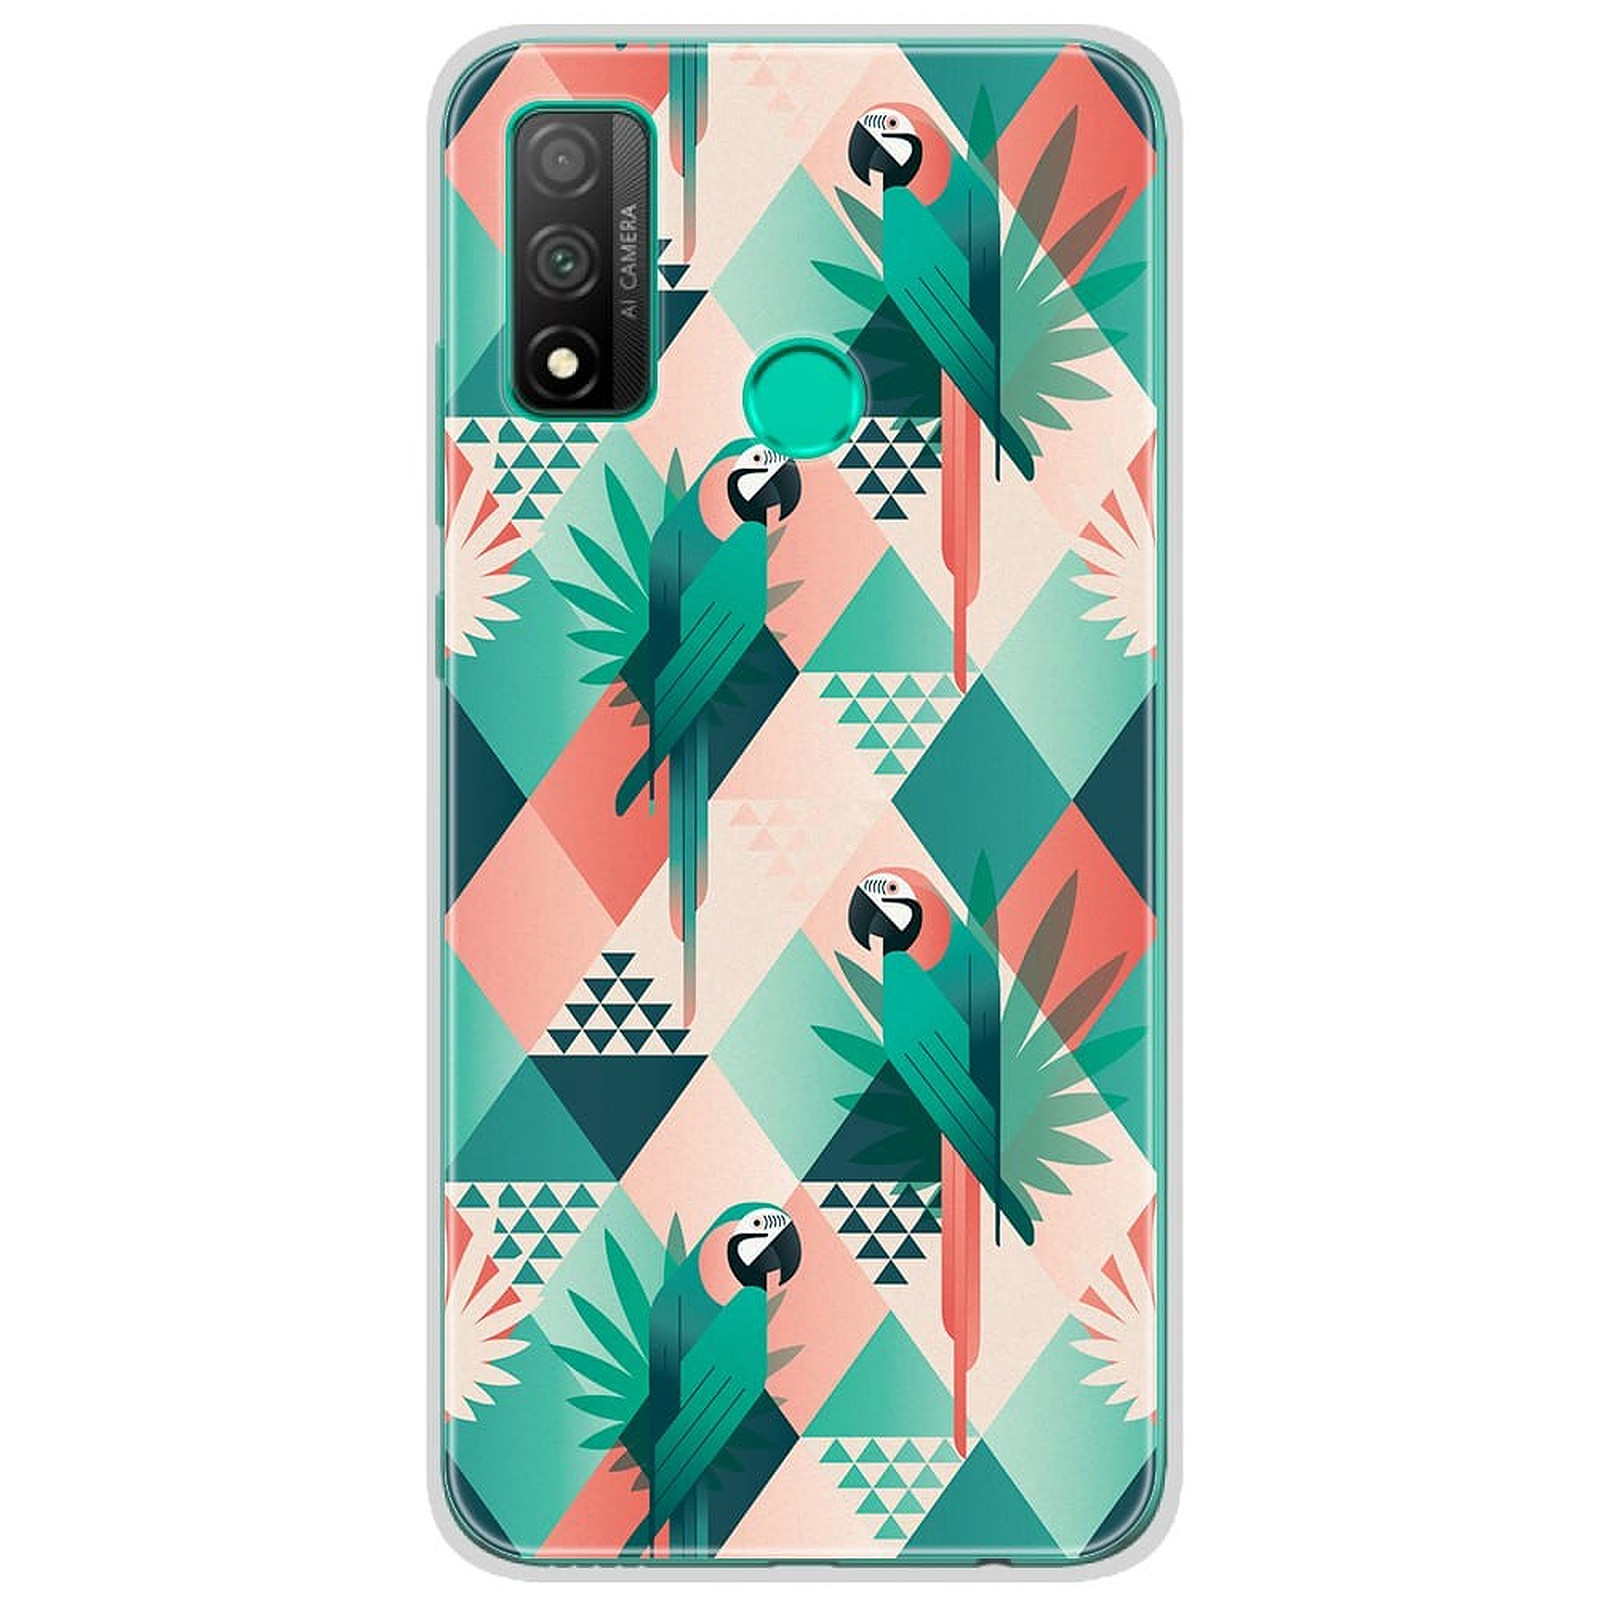 1001 Coques Coque silicone gel Huawei P Smart 2020 motif Perroquet ge´ome´trique - Coque telephone 1001Coques